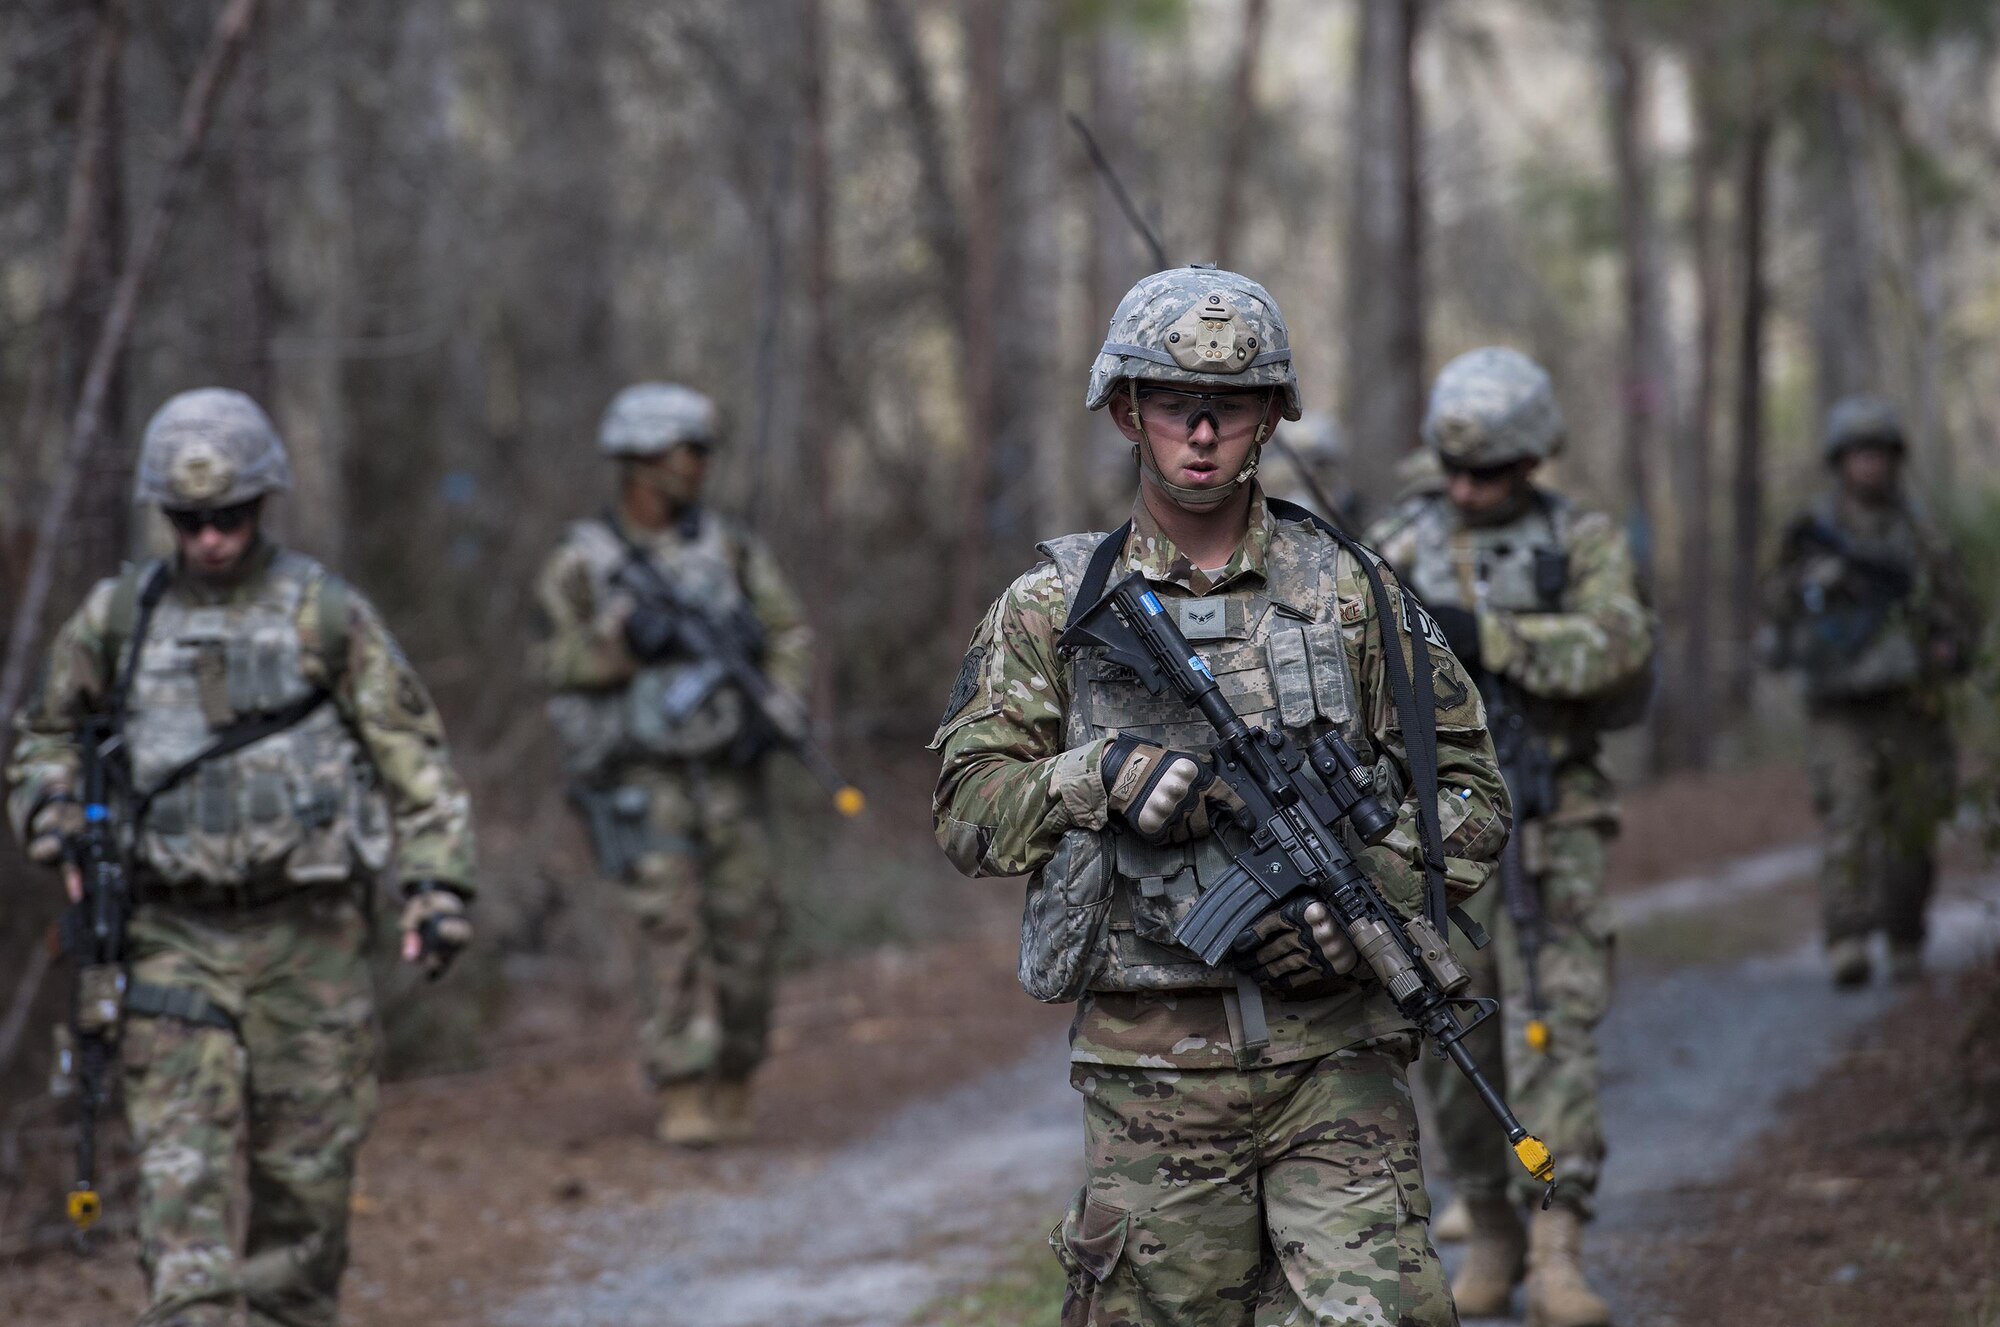 Airmen from the 822d Base Defense Squadron simulate patrolling an area outside the wire Feb. 7, 2017, at Moody Air Force Base, Ga. This scenario was a part of the 822d BDS’s Tactical Operation Center Exercise. The exercise is designed to test communication and decision making between leadership in a control center and Airmen outside the wire. (U.S. Air Force photo by Airman 1st Class Janiqua P. Robinson)